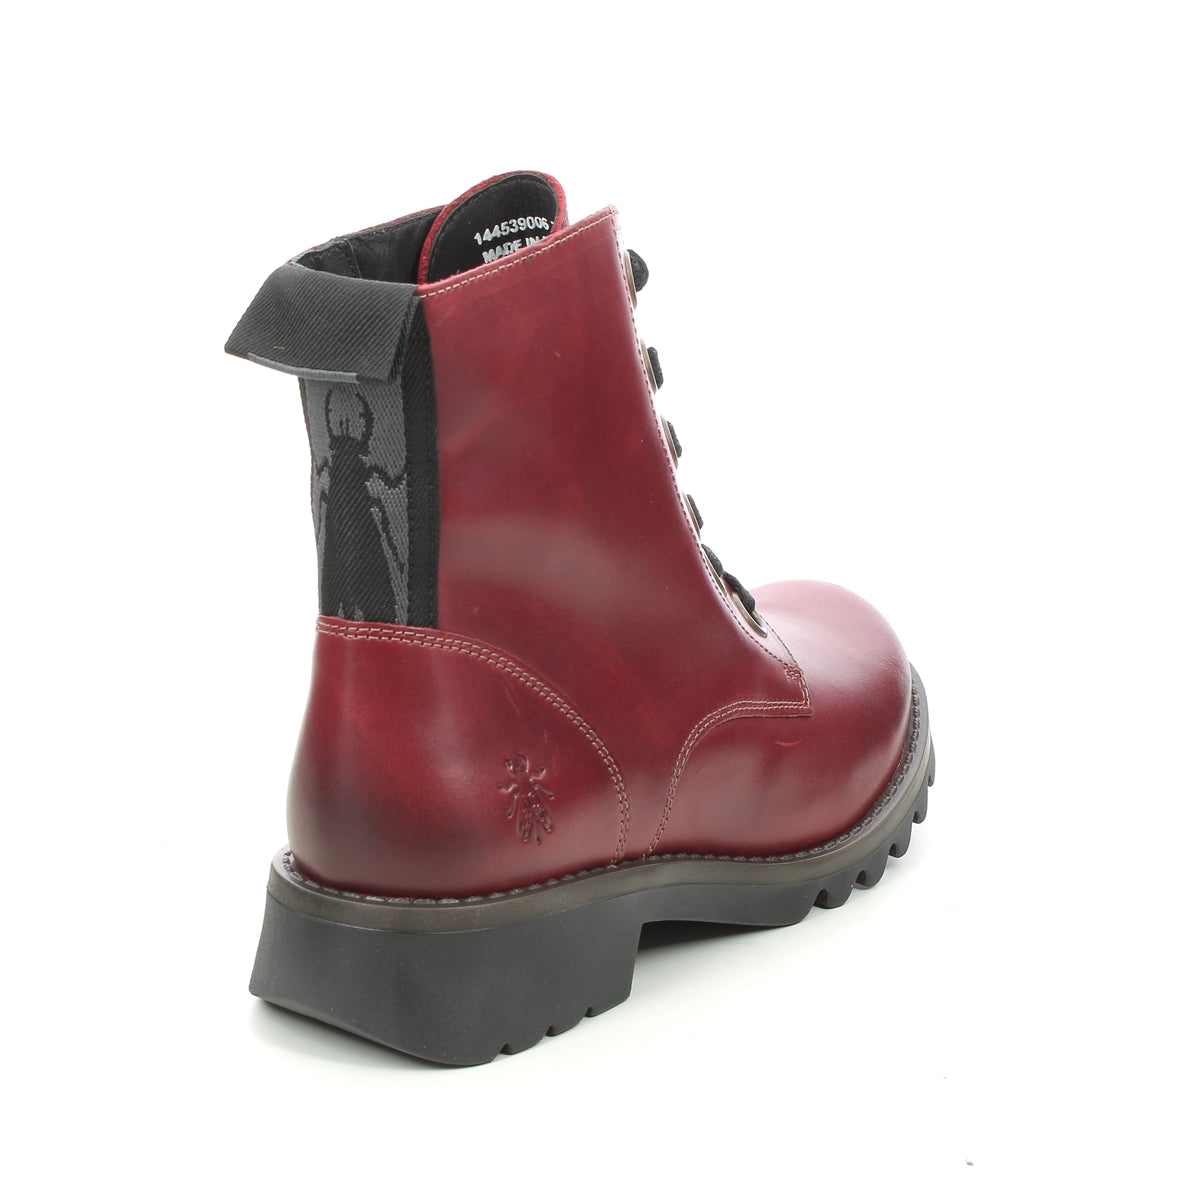 FLY LONDON RAGIFLY RED - Women Boots - Collective Shoes 